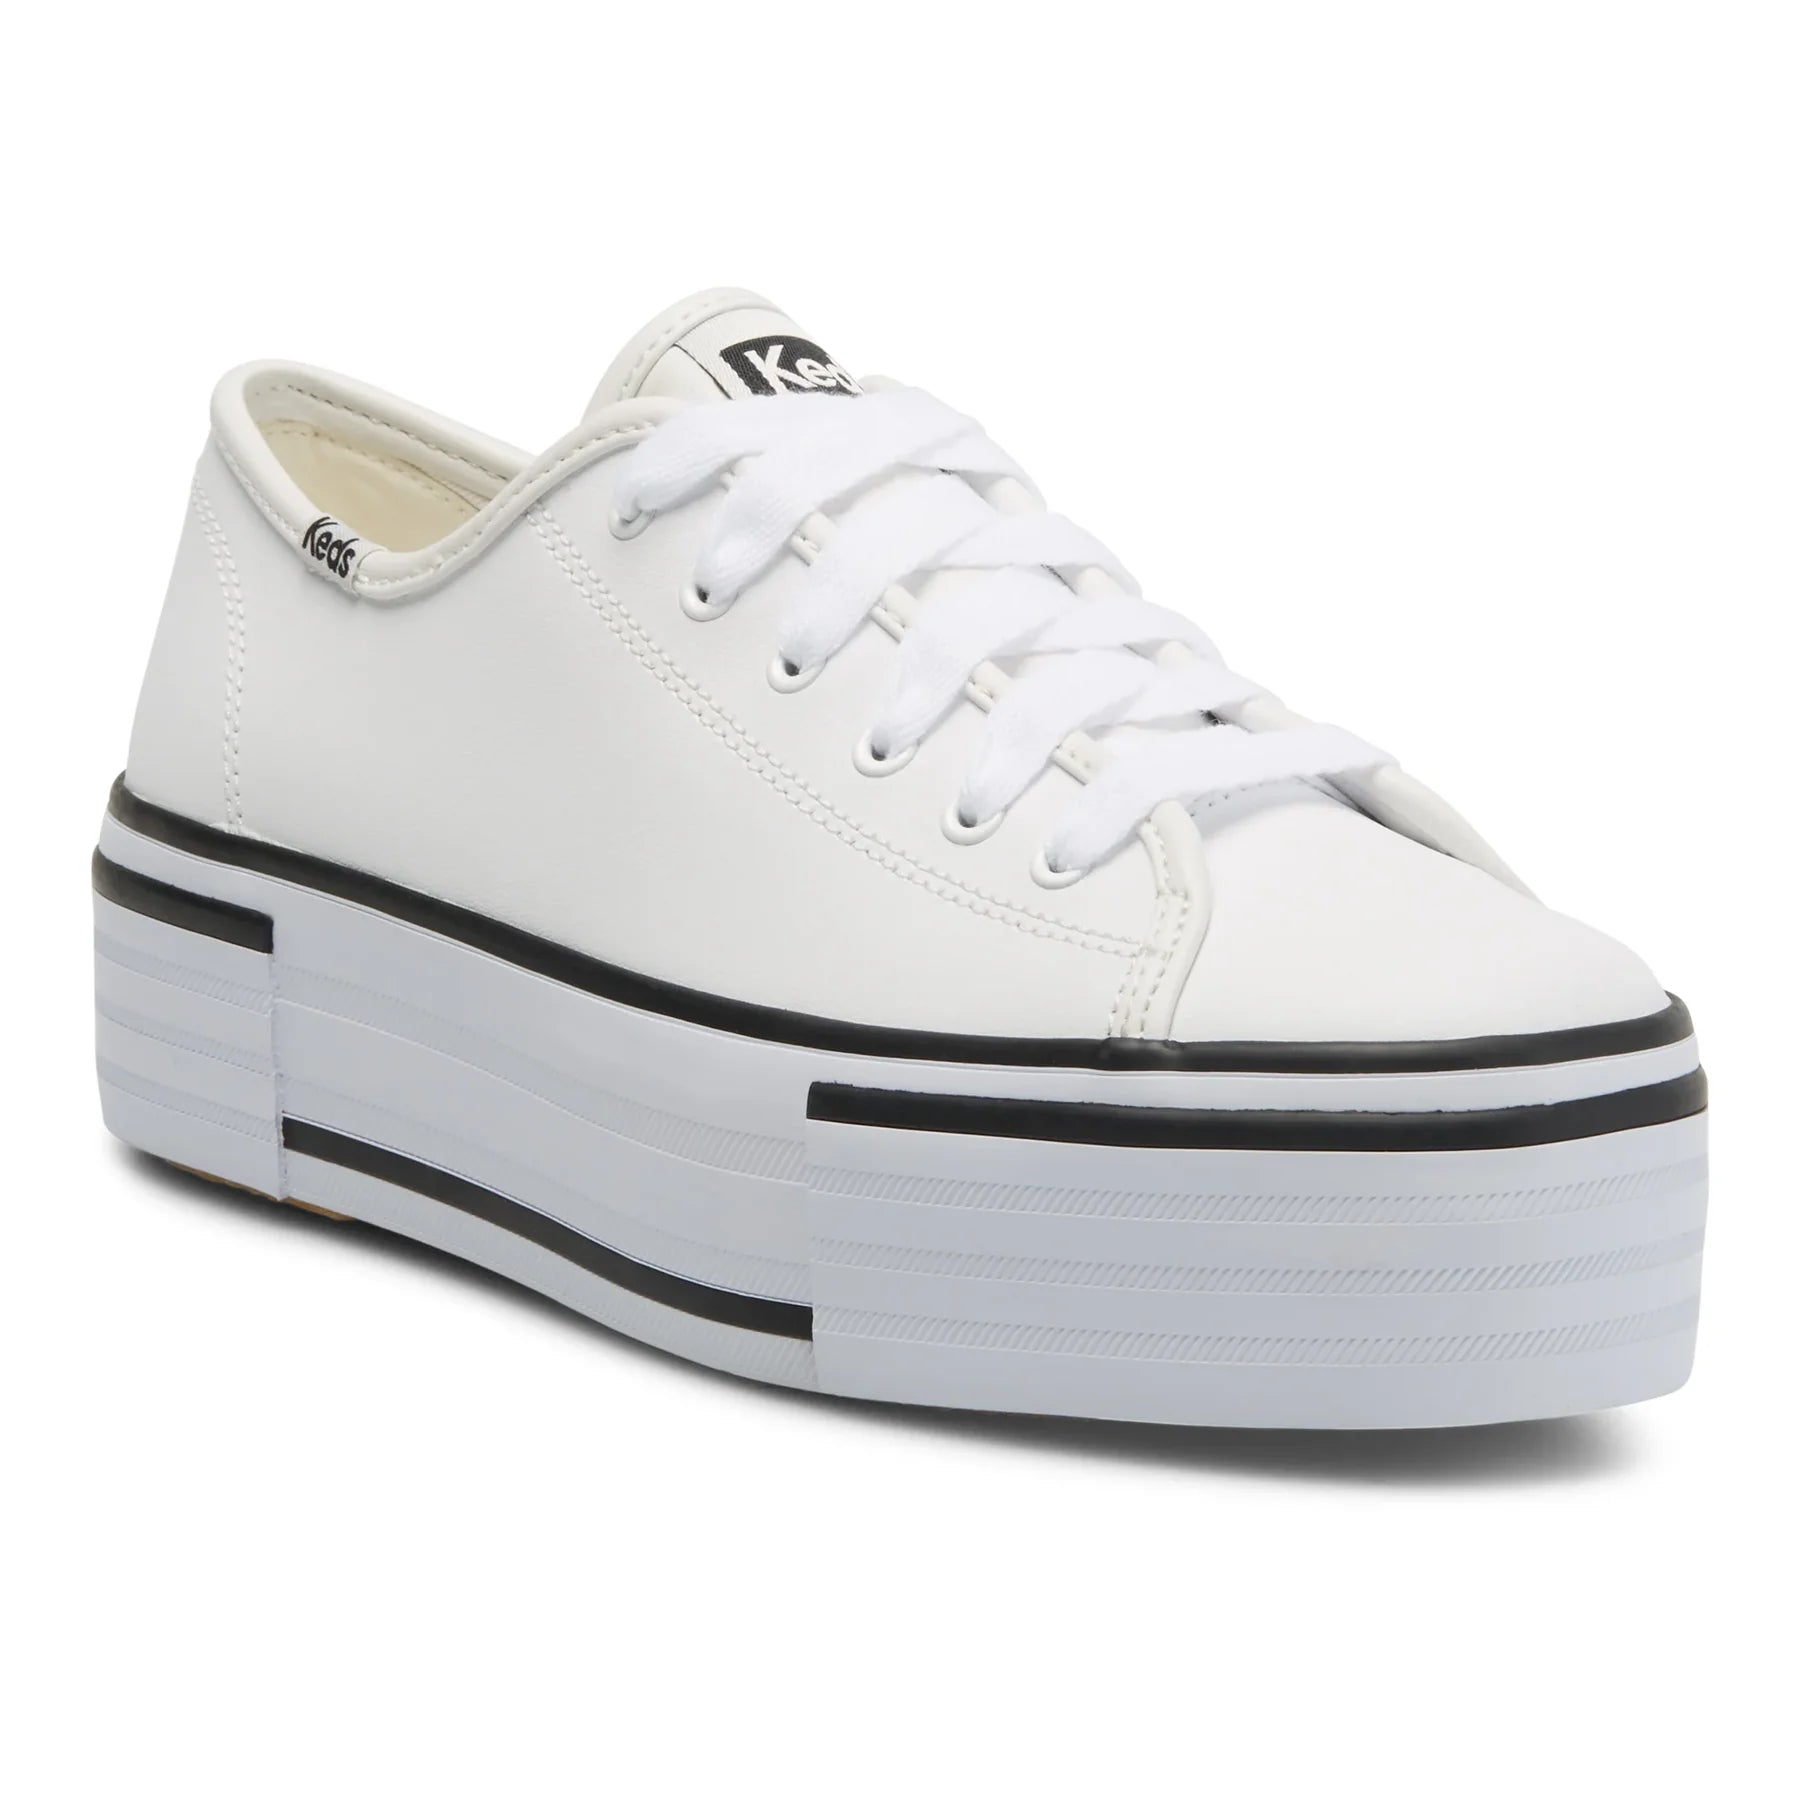 KEDS - Triple Up Leather-Foxing - White